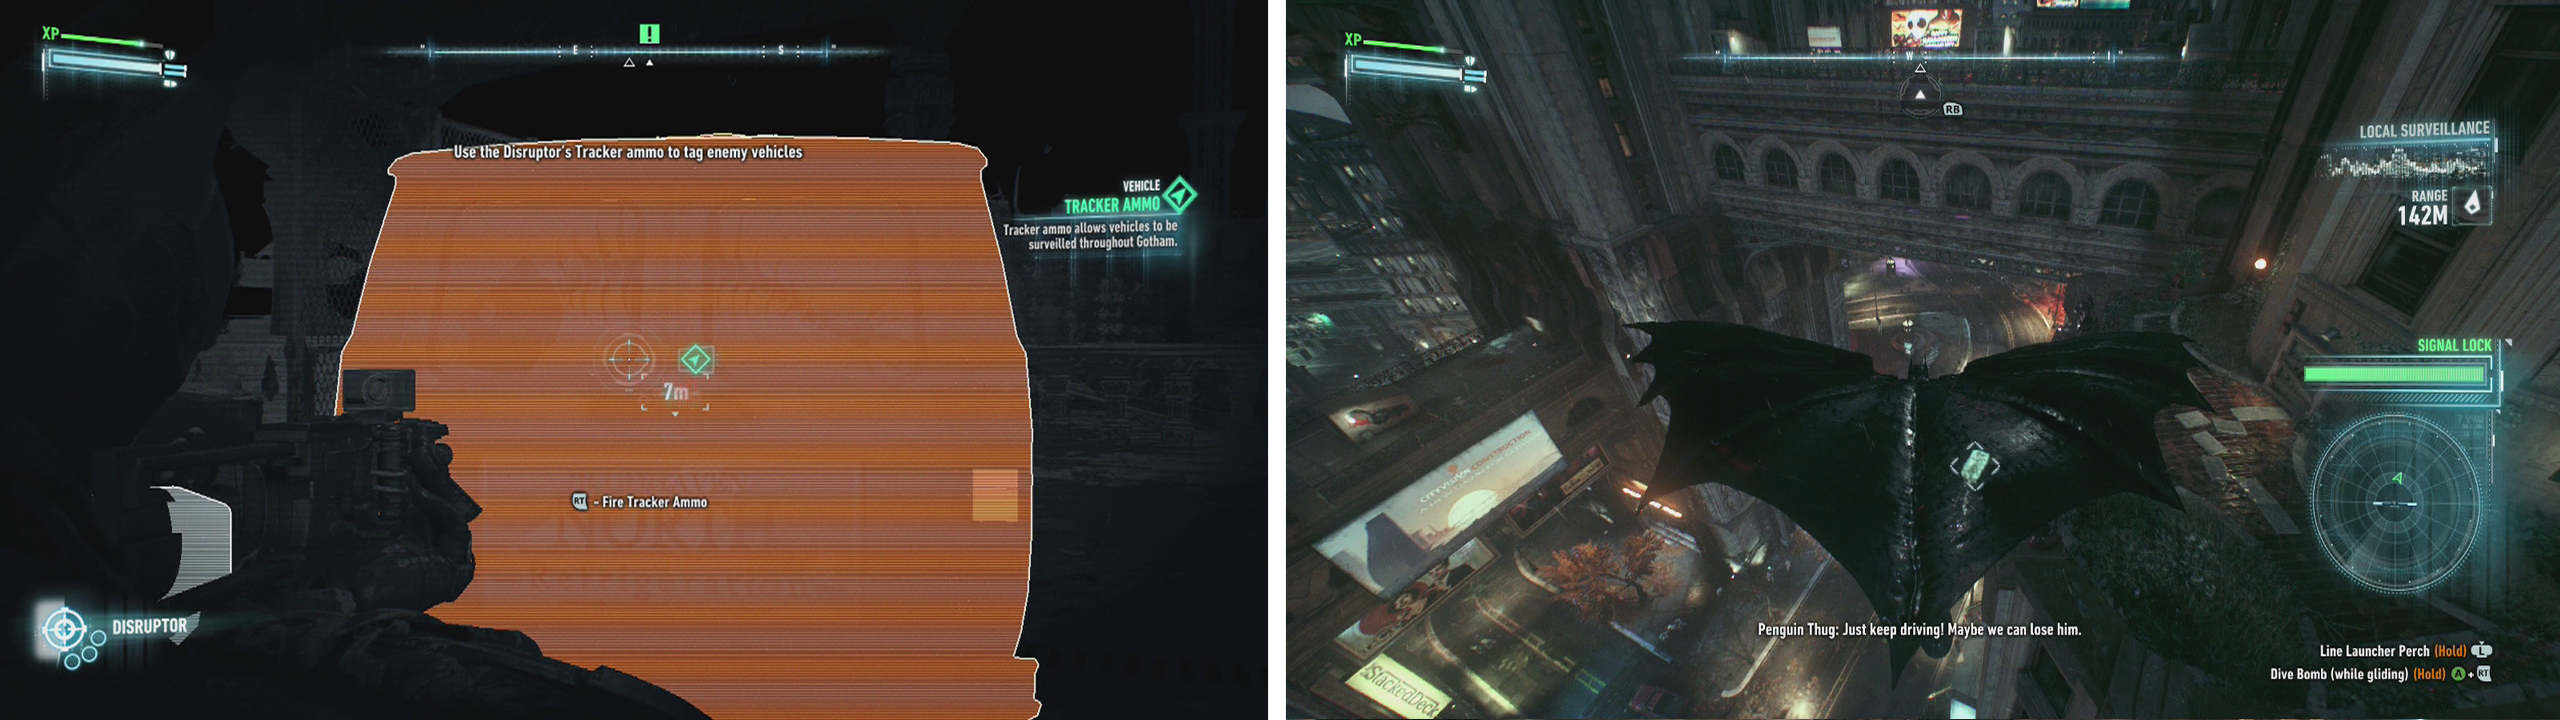 Shoot the Disruptor onto the van (left). Follow the van through the city from above (right).